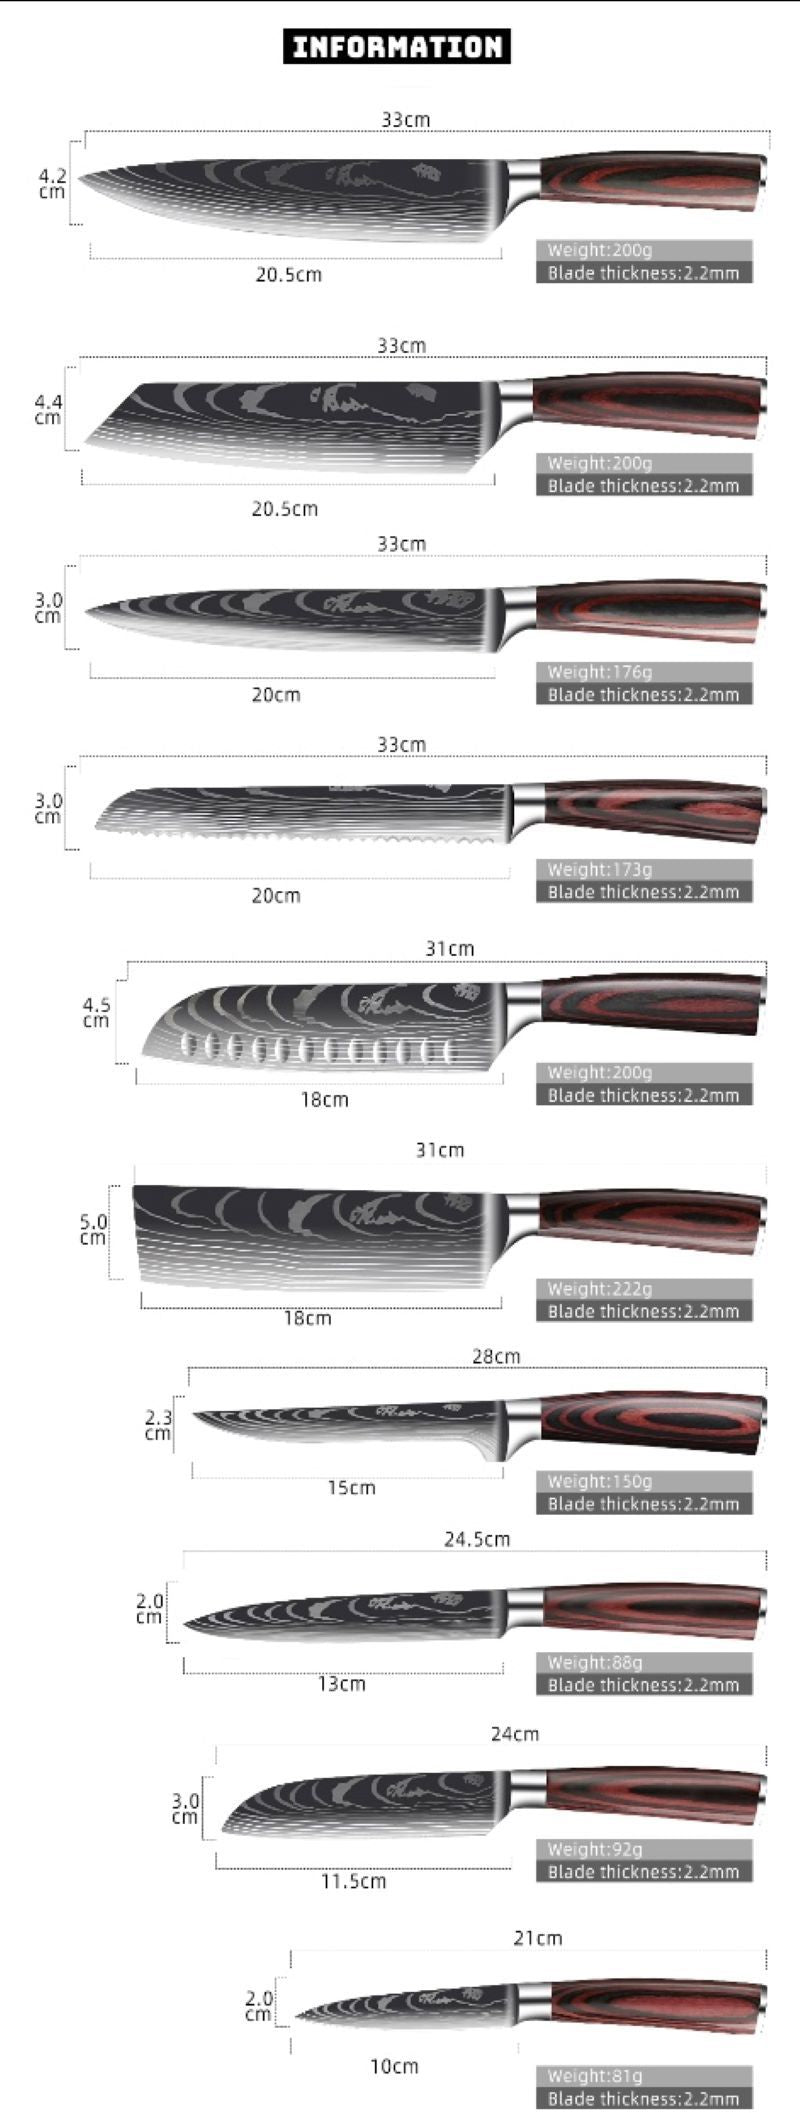 Cleaver Slicing Chef Kitchen Knives